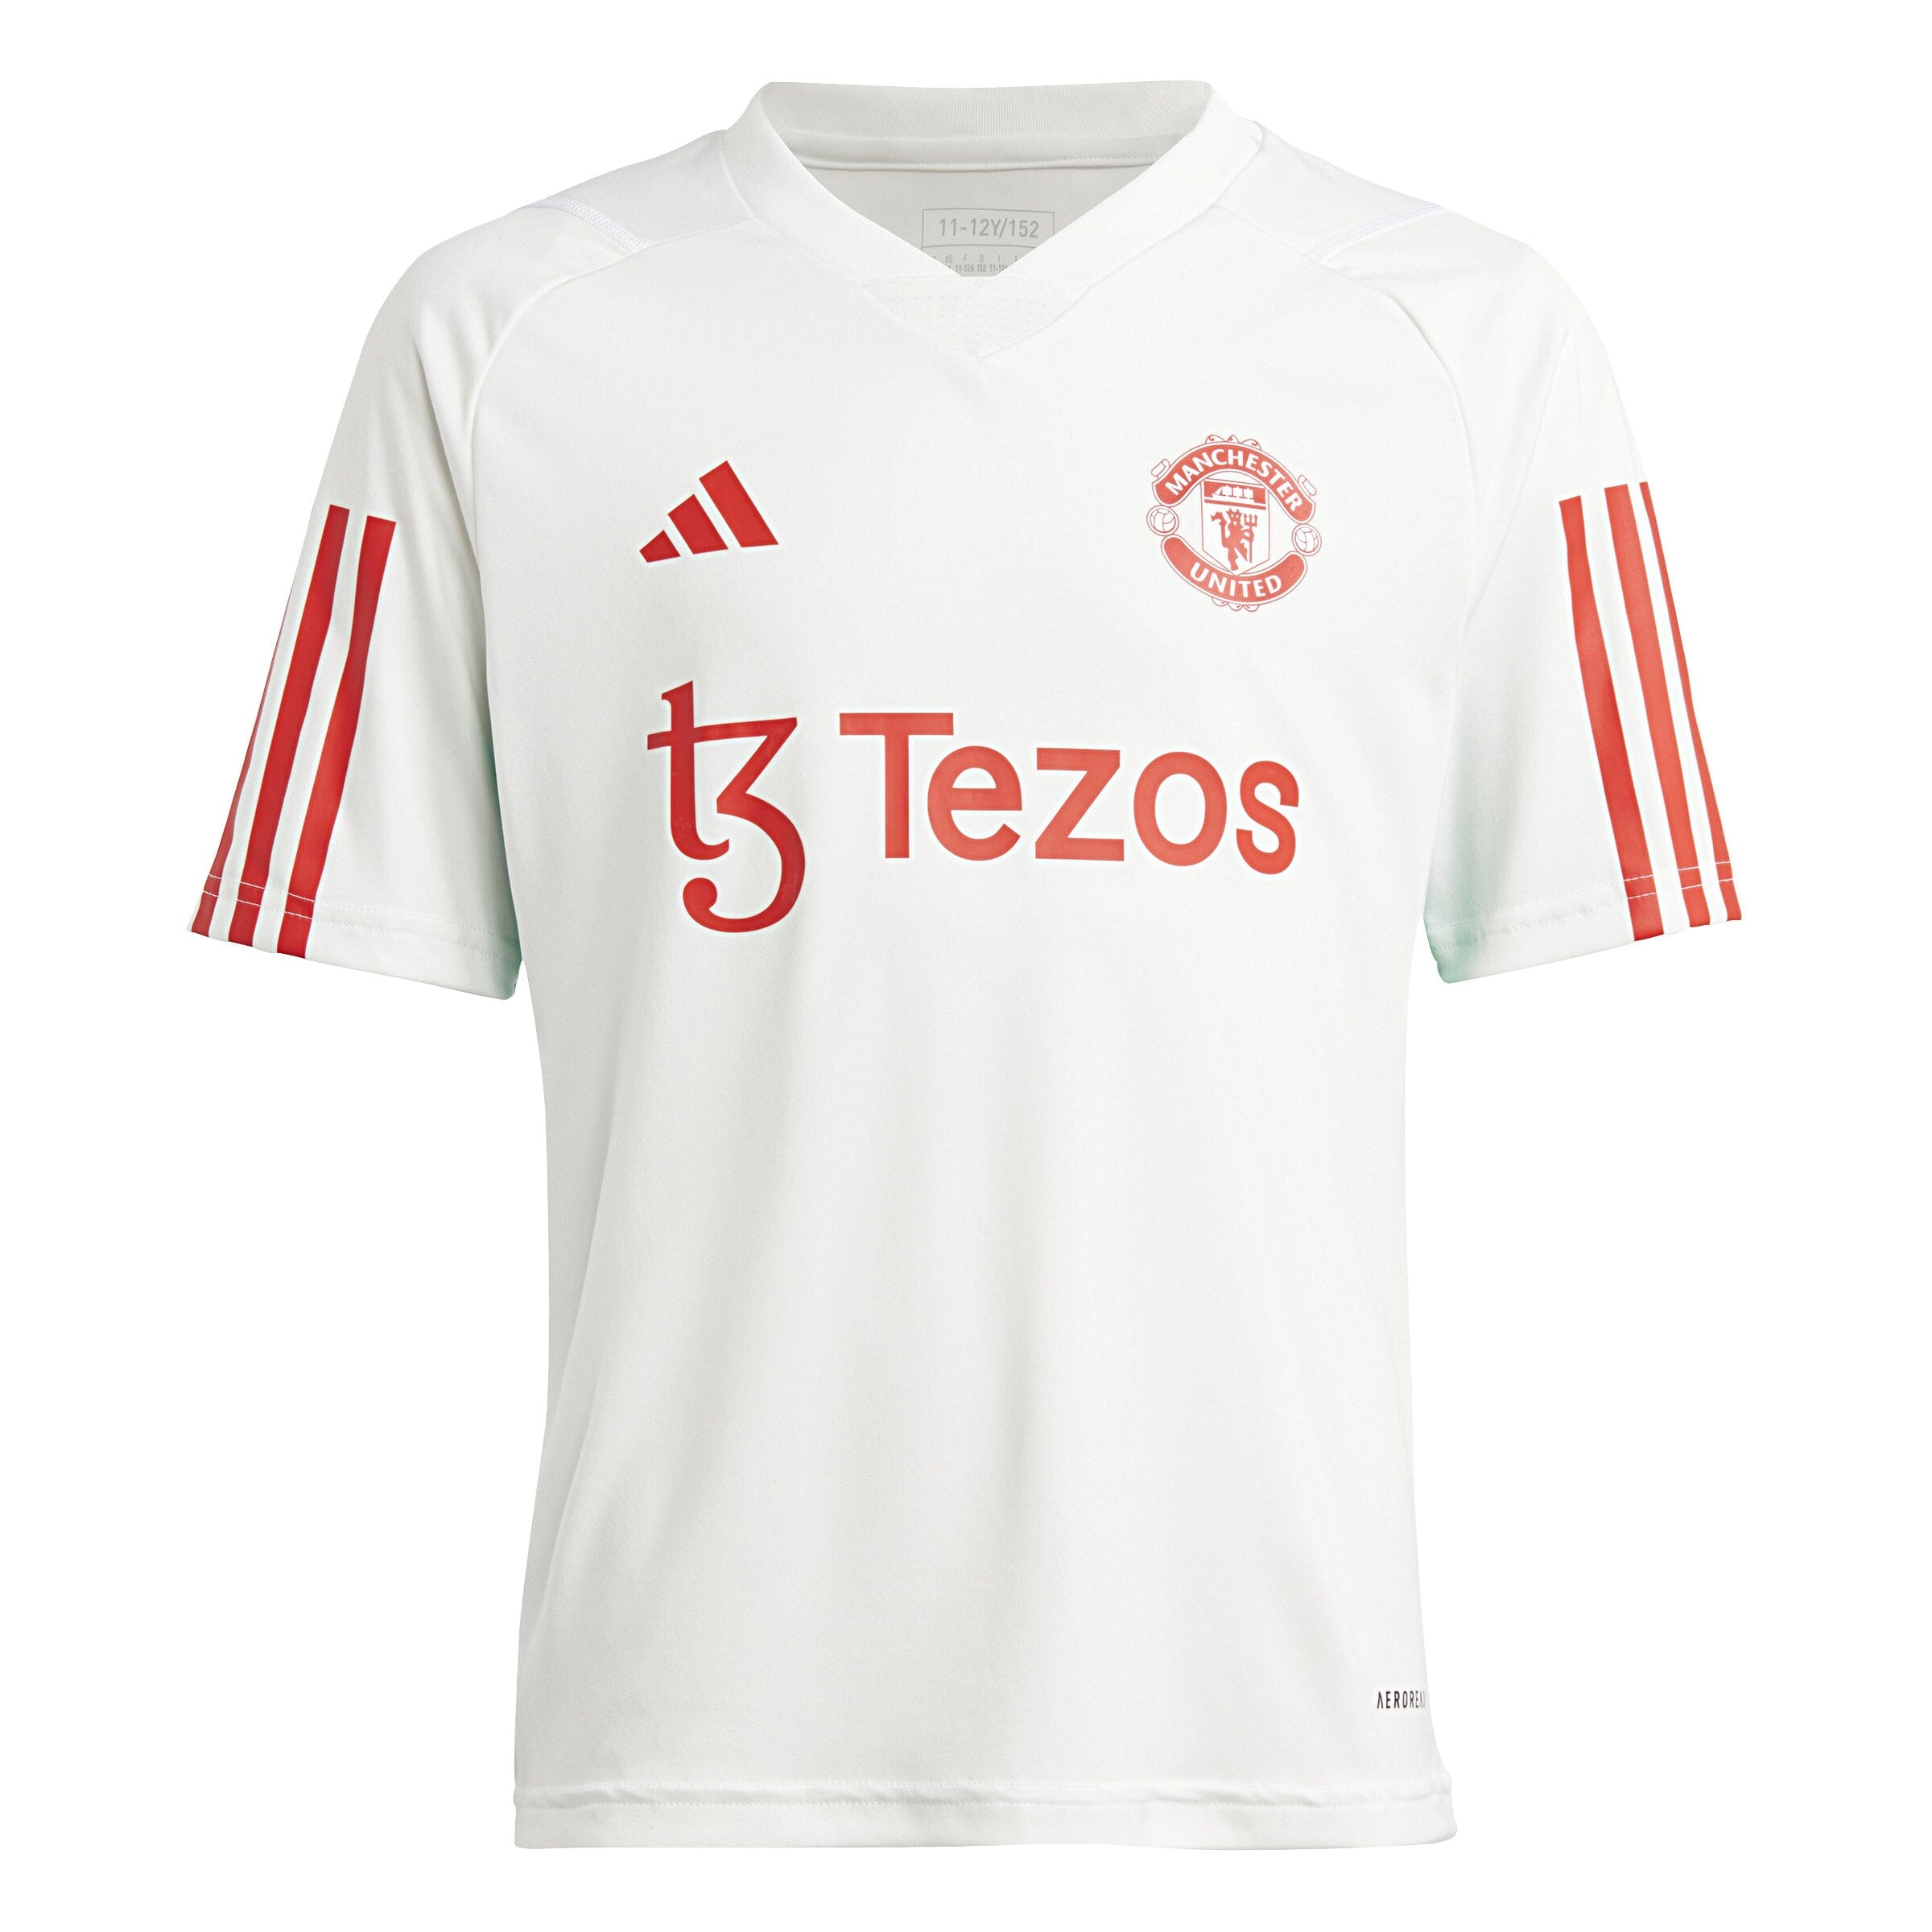 Men's Adidas Red Manchester United 2021/22 Training Jersey